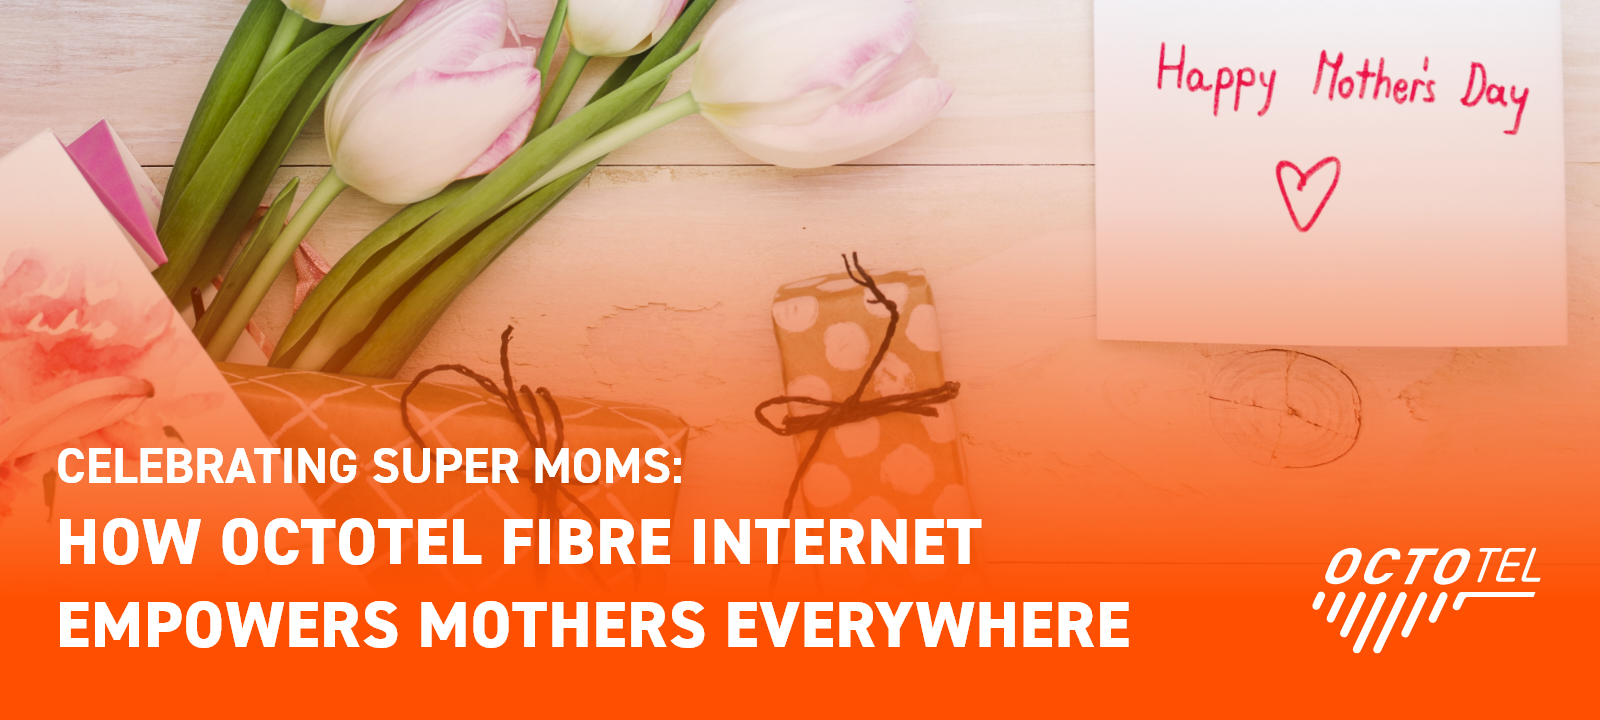 CELEBRATING SUPER MOMS: HOW OCTOTEL FIBRE INTERNET EMPOWERS MOTHERS EVERYWHERE.